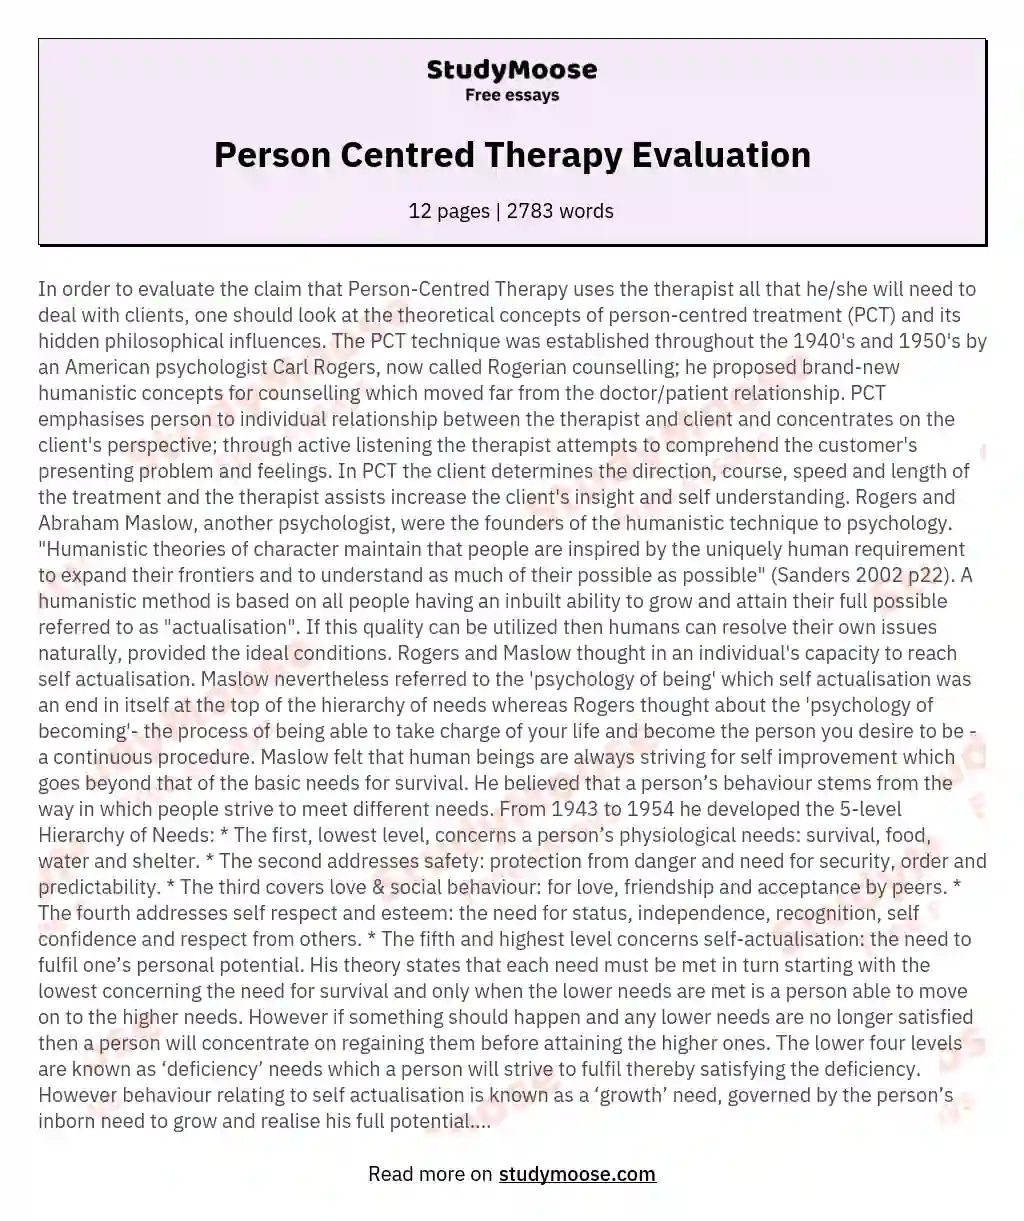 Person Centred Therapy Evaluation